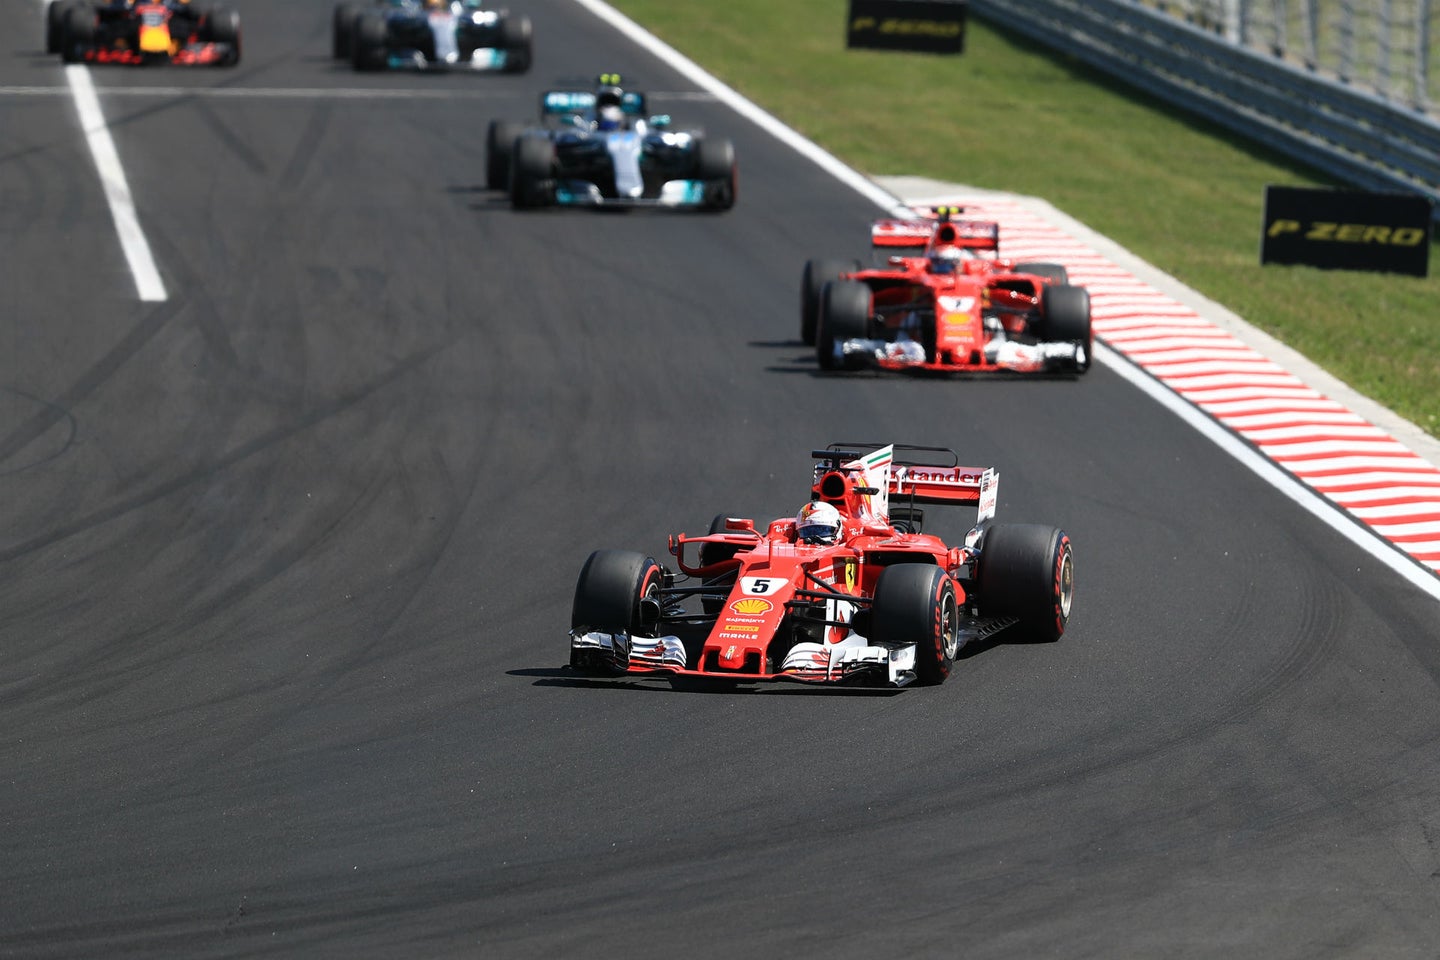 Formula One May Standardize Parts To Close Spending Gap Between Teams, CEO Says